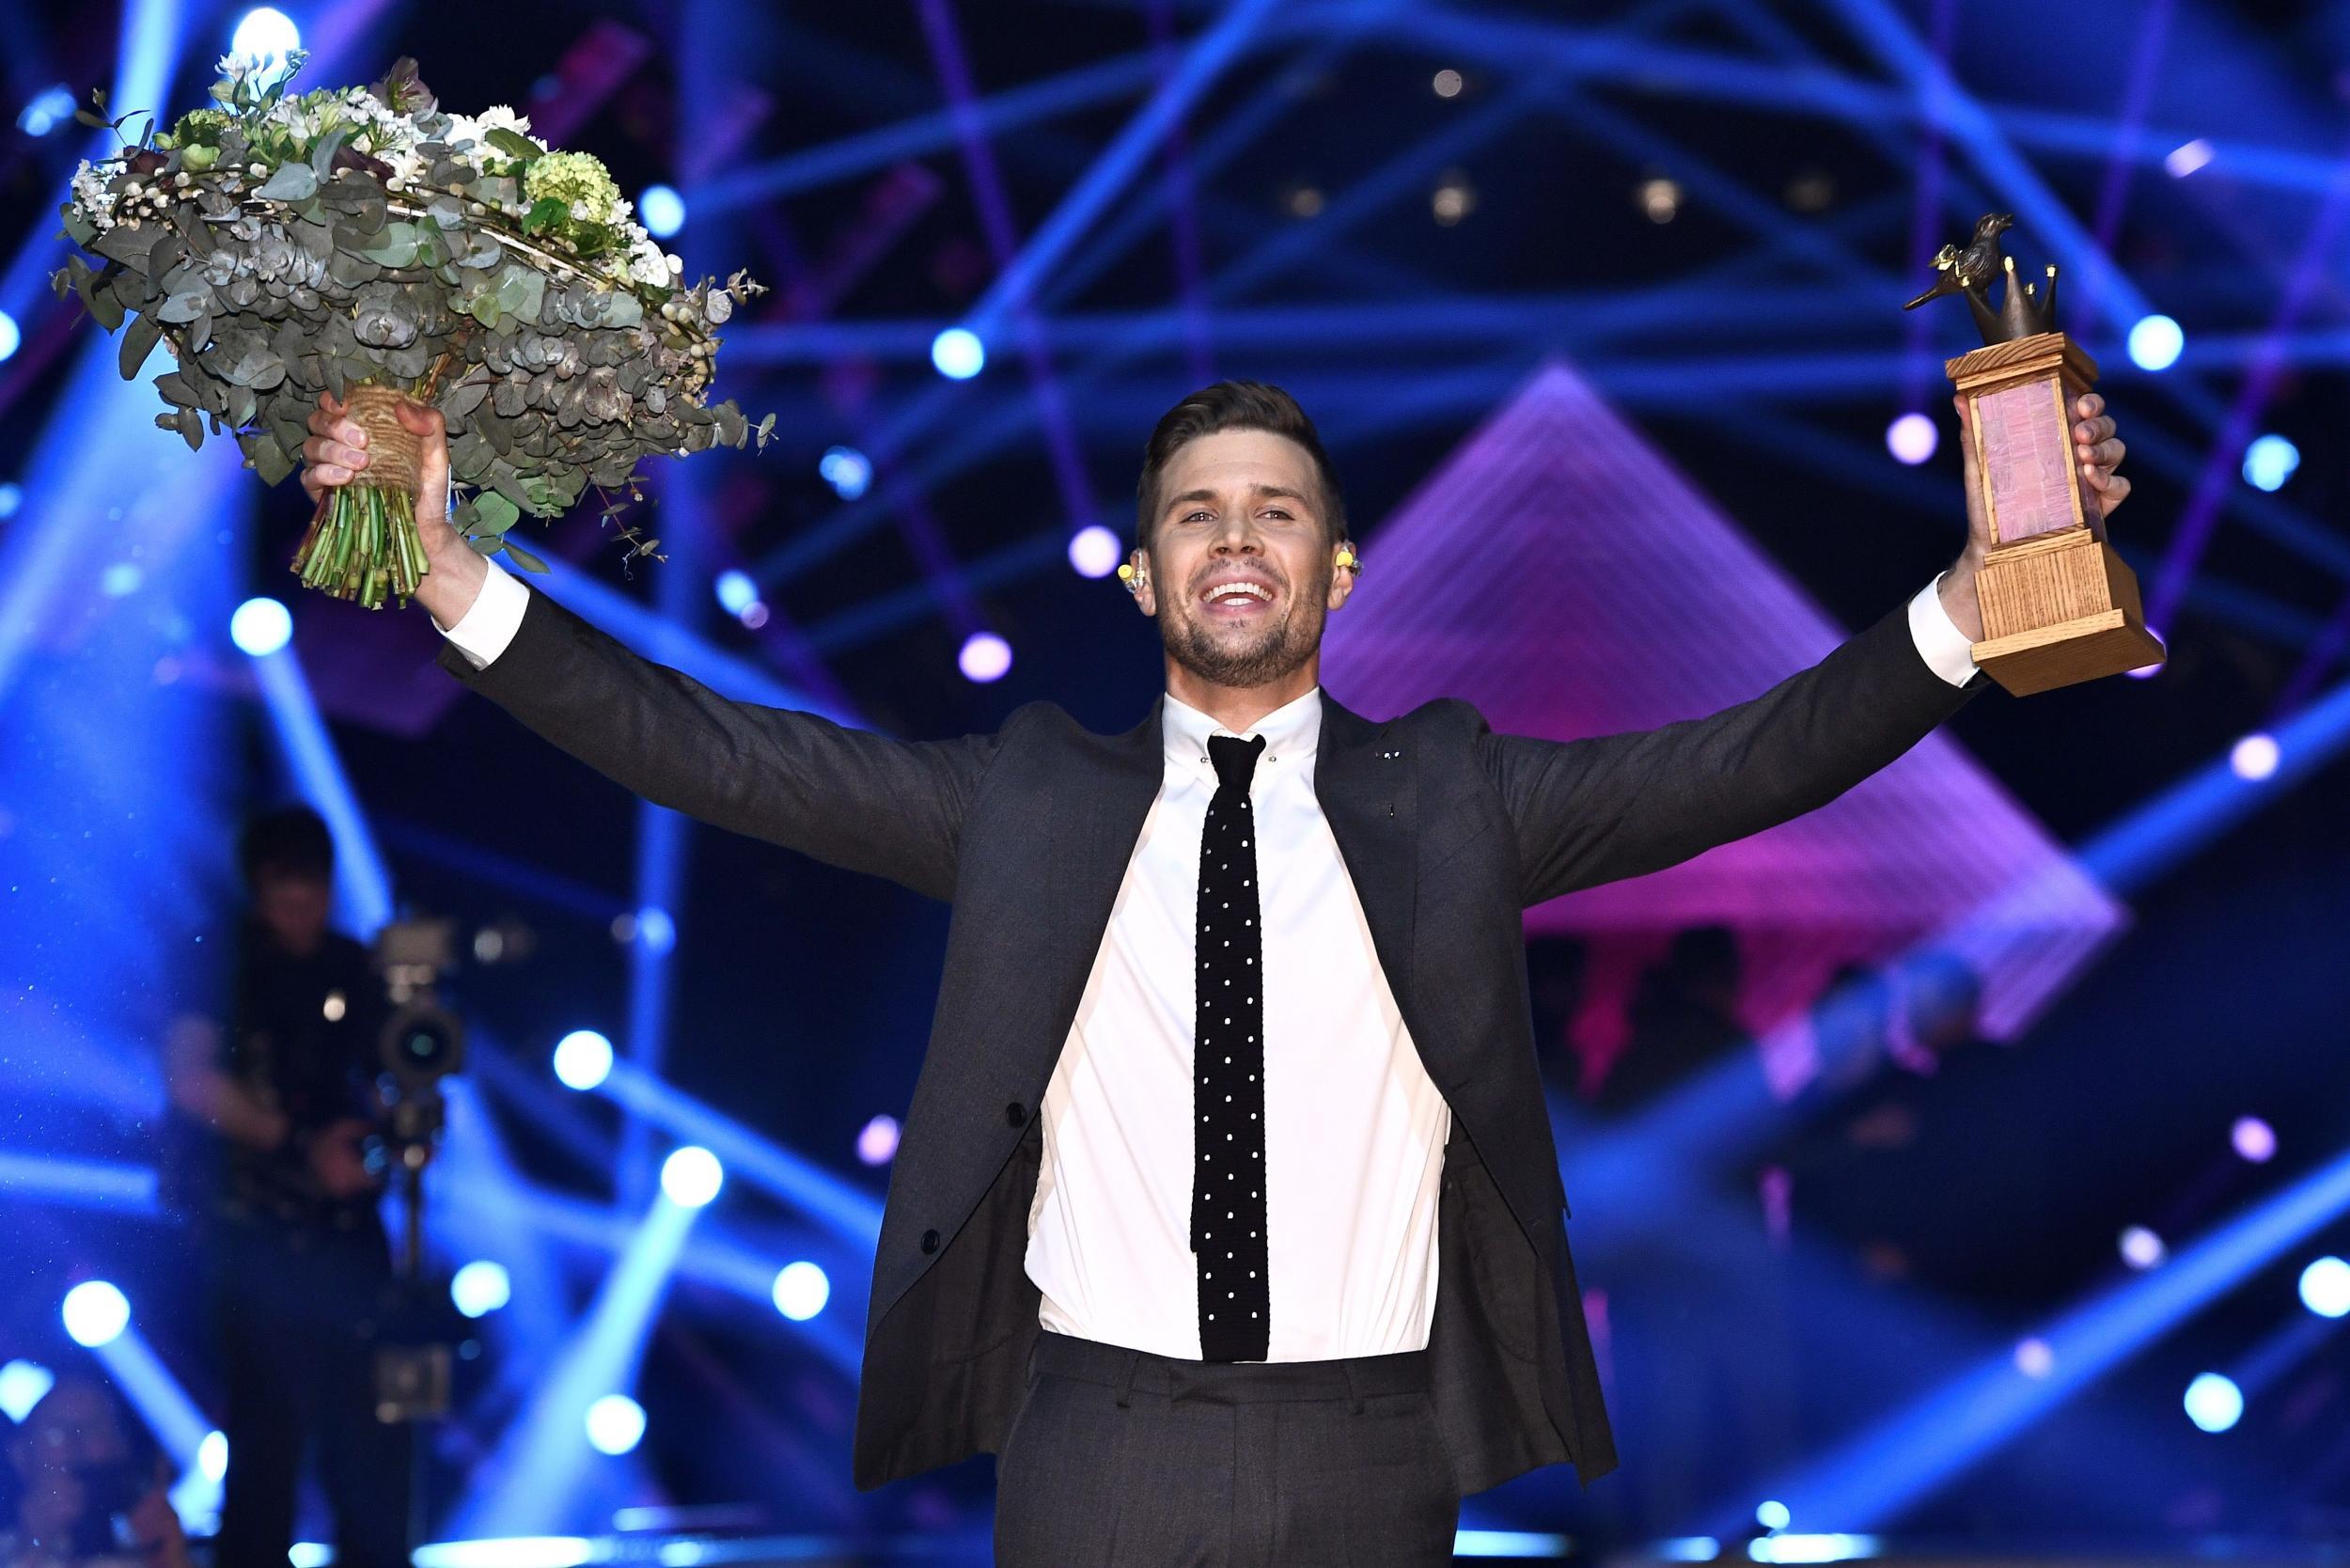 Singer Robin Bengtsson celebrates winning the finale in the Swedish song contest 'Melodifestivalen' with the entry 'I Can't Go On' at the Friends Arena in Stockholm, on March 11, 2017